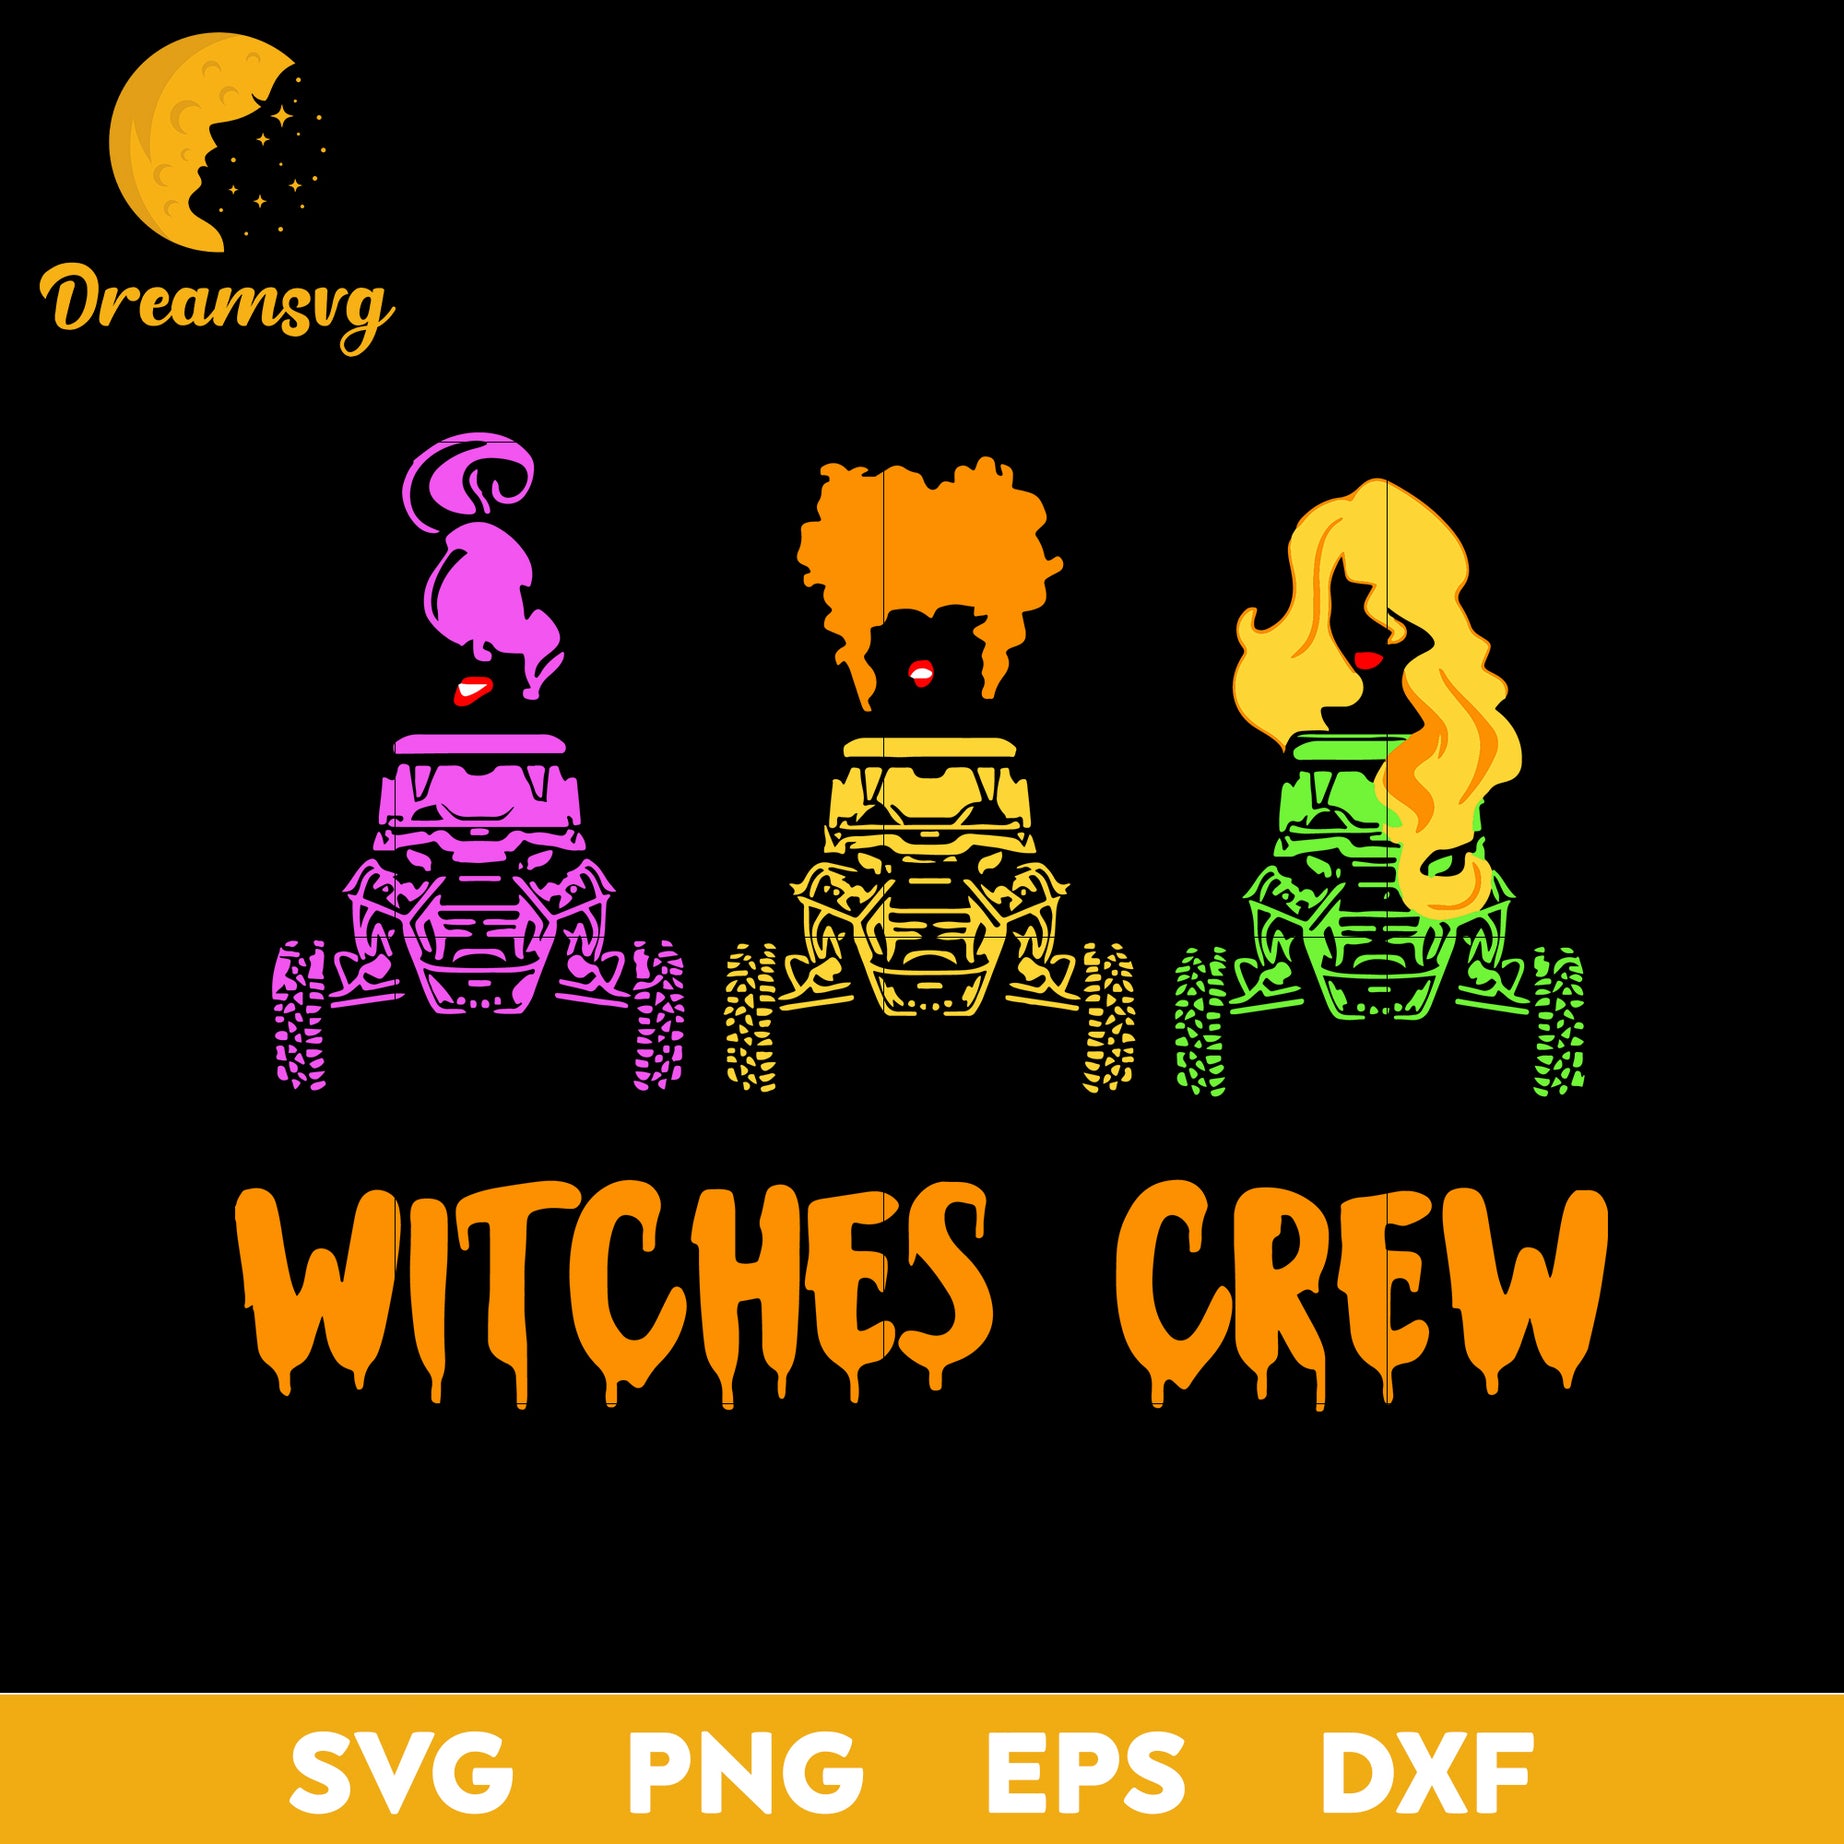 Jeep Hocus Pocus Witches Crew svg, Halloween svg, png, dxf, eps digital file.